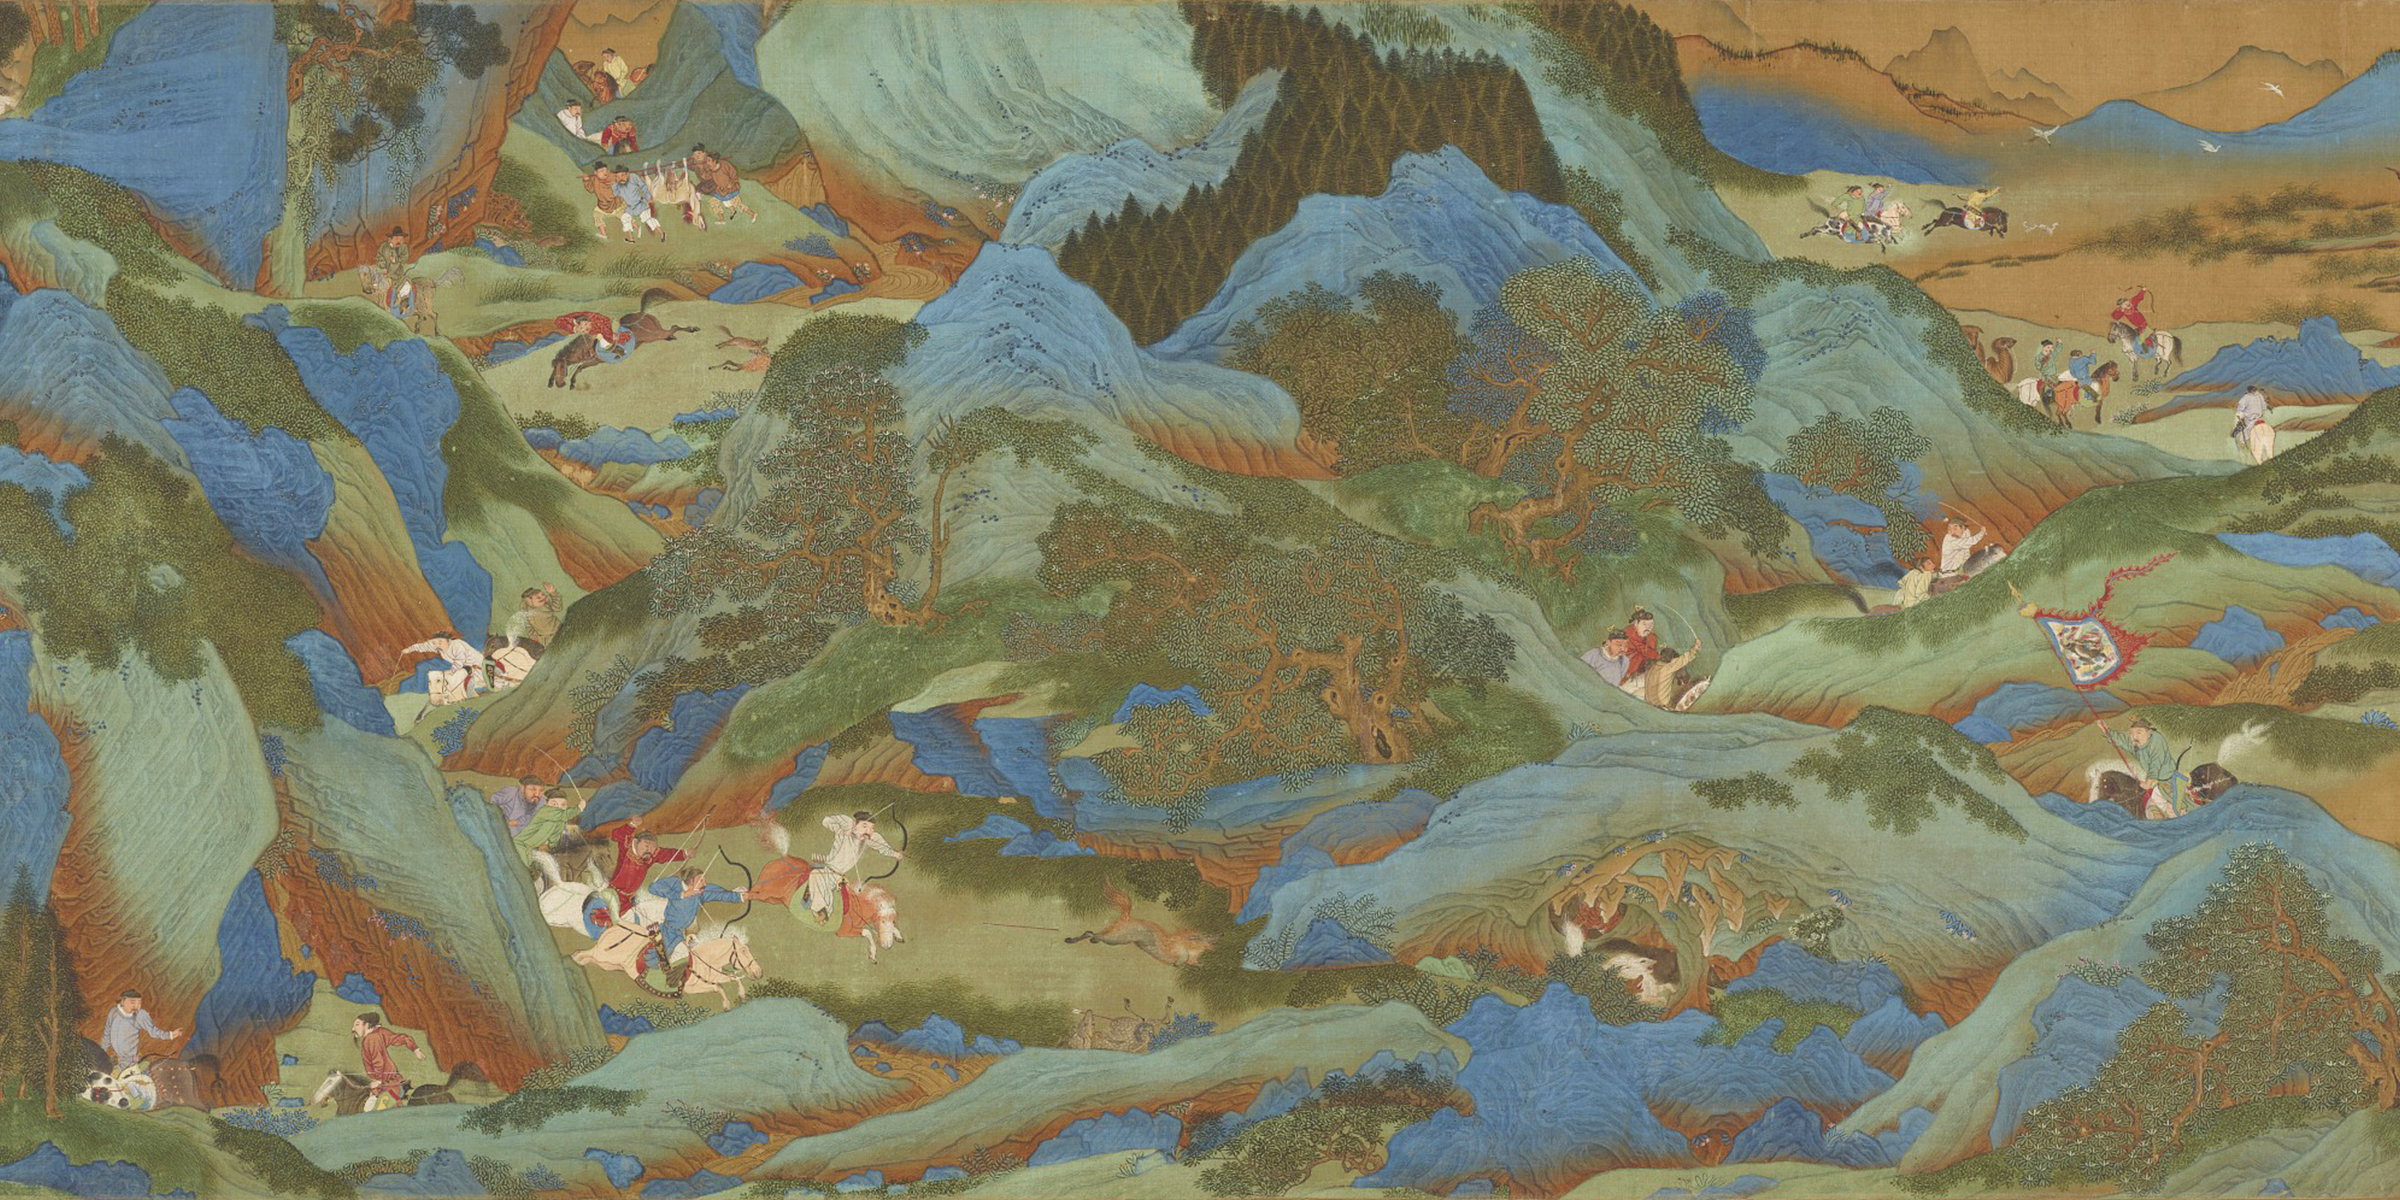 The Shanglin Park: Imperial Hunt, handscroll attributed to Qiu Ying, Ming dynasty, mid- to late sixteenth century. Smithsonian Institution, National Museum of Asian Art, Gift of Charles Lang Freer.